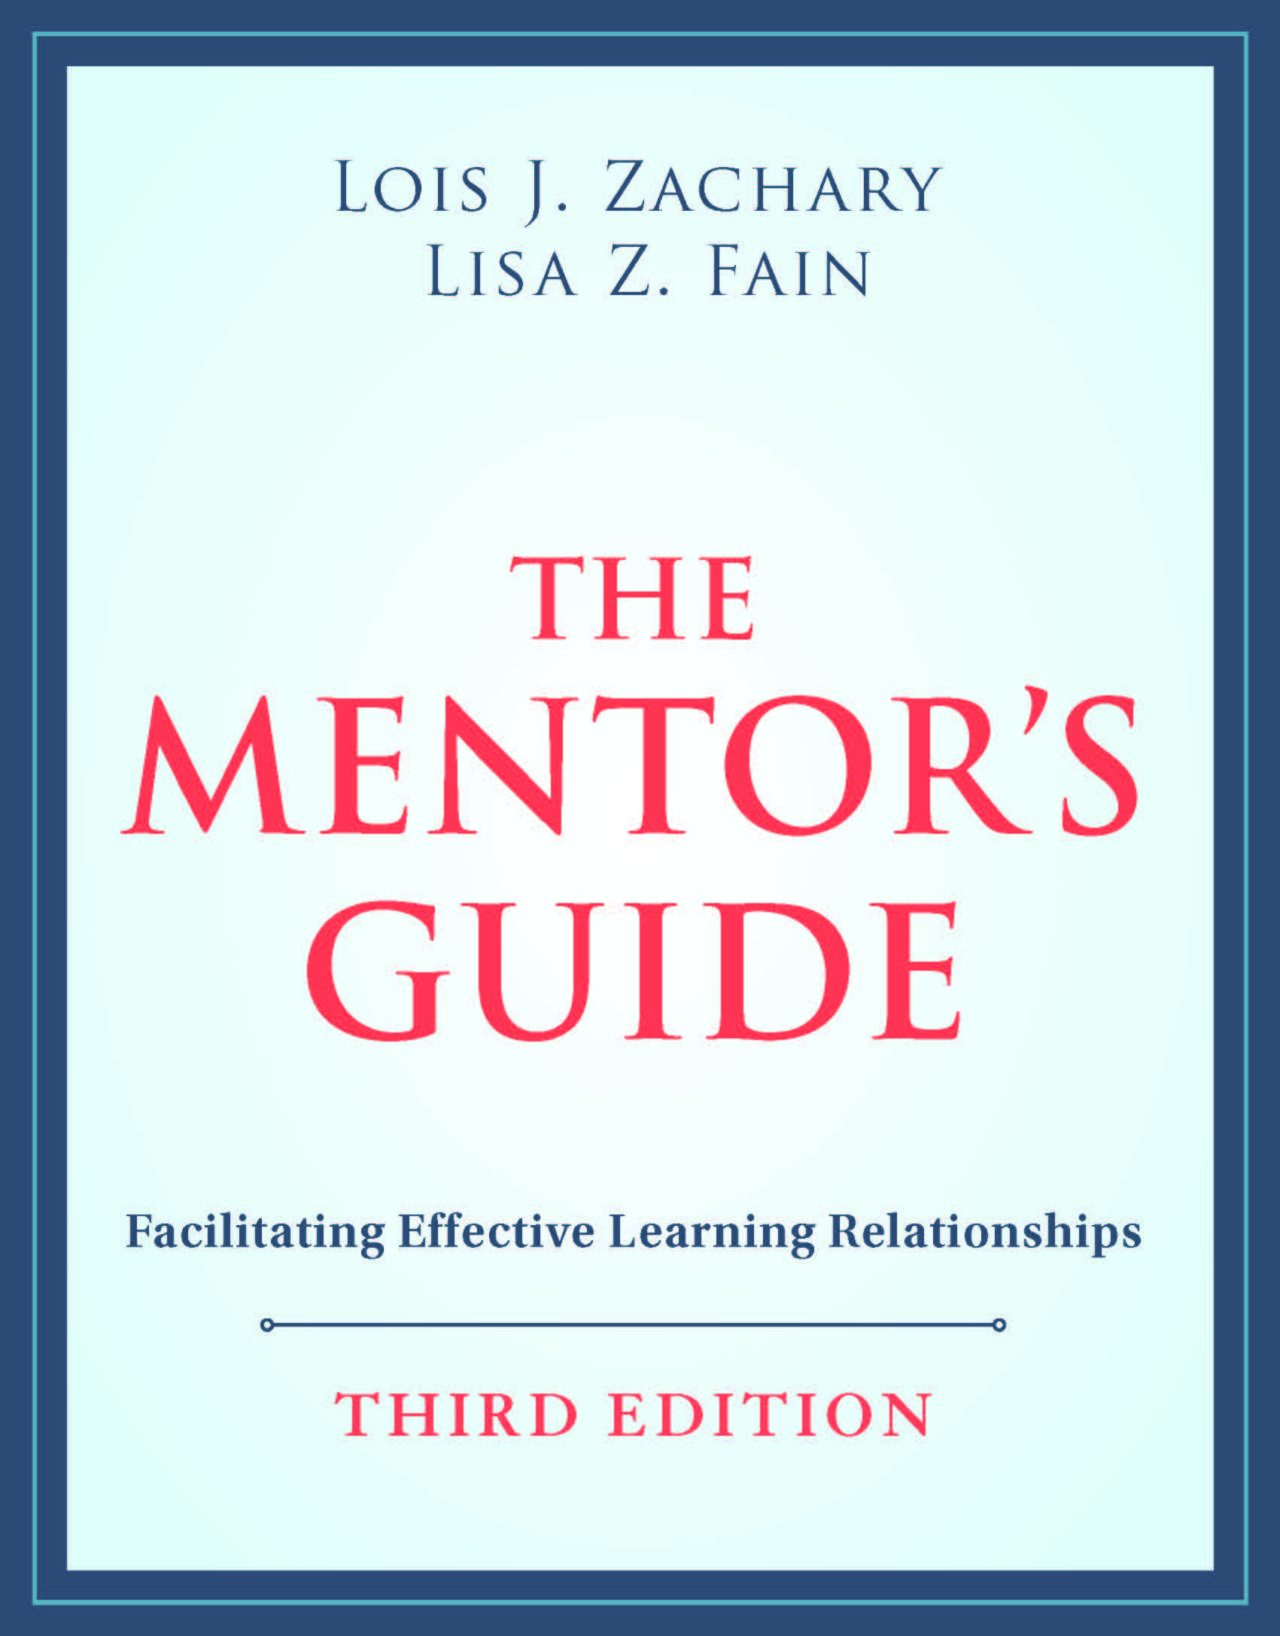 The Mentor’s Guide | Center for Mentoring Excellence